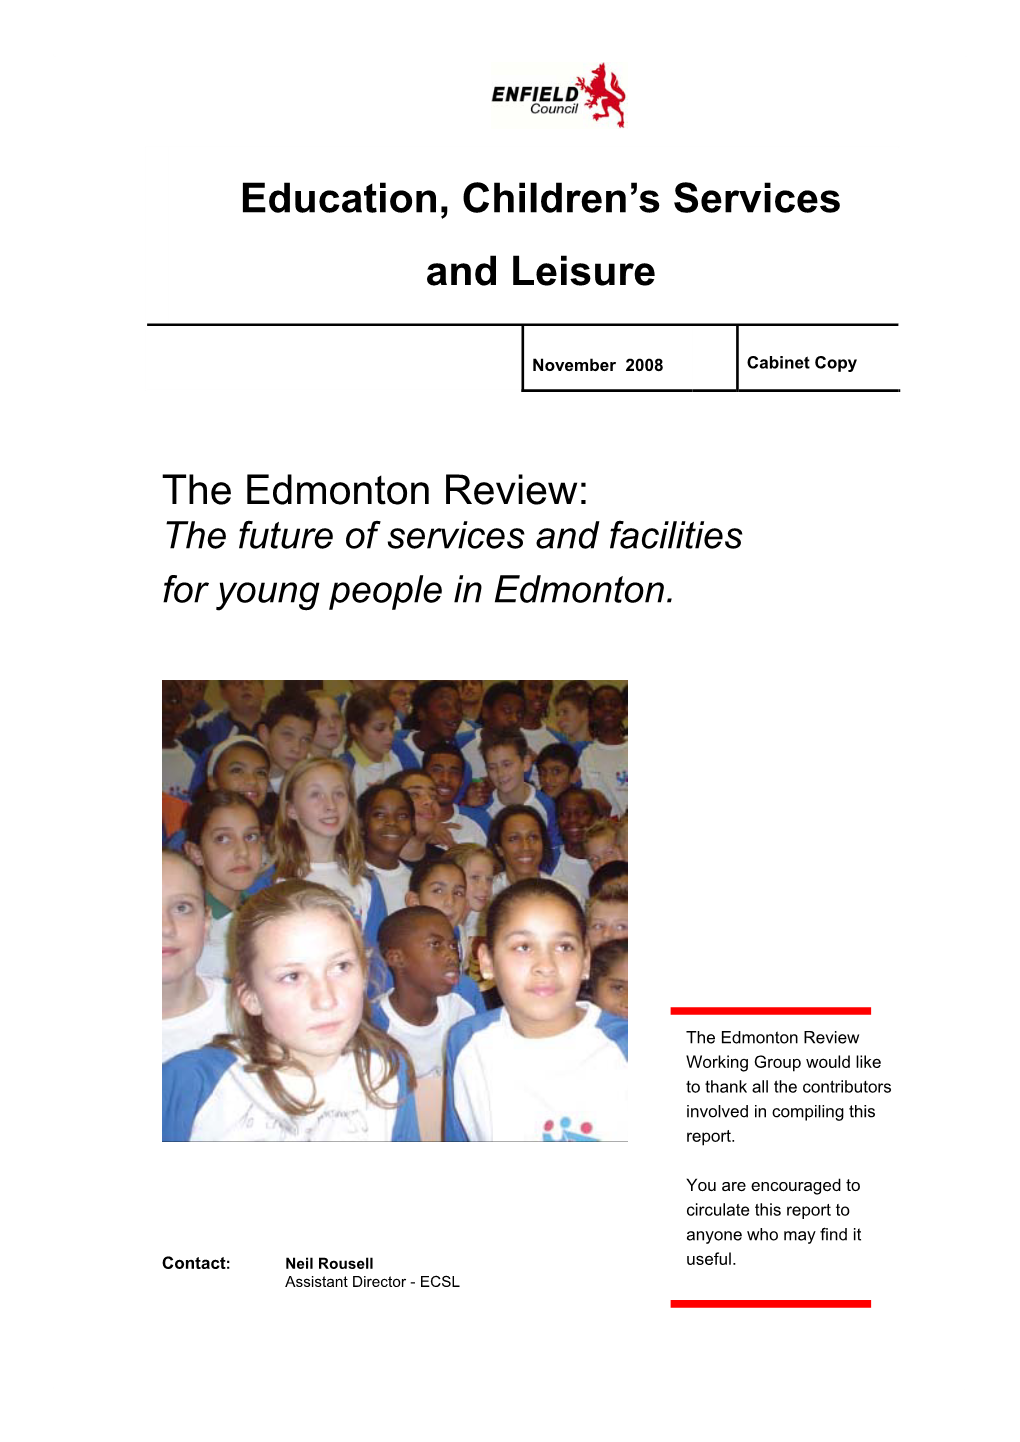 The Edmonton Review: the Future of Services and Facilities for Young People in Edmonton